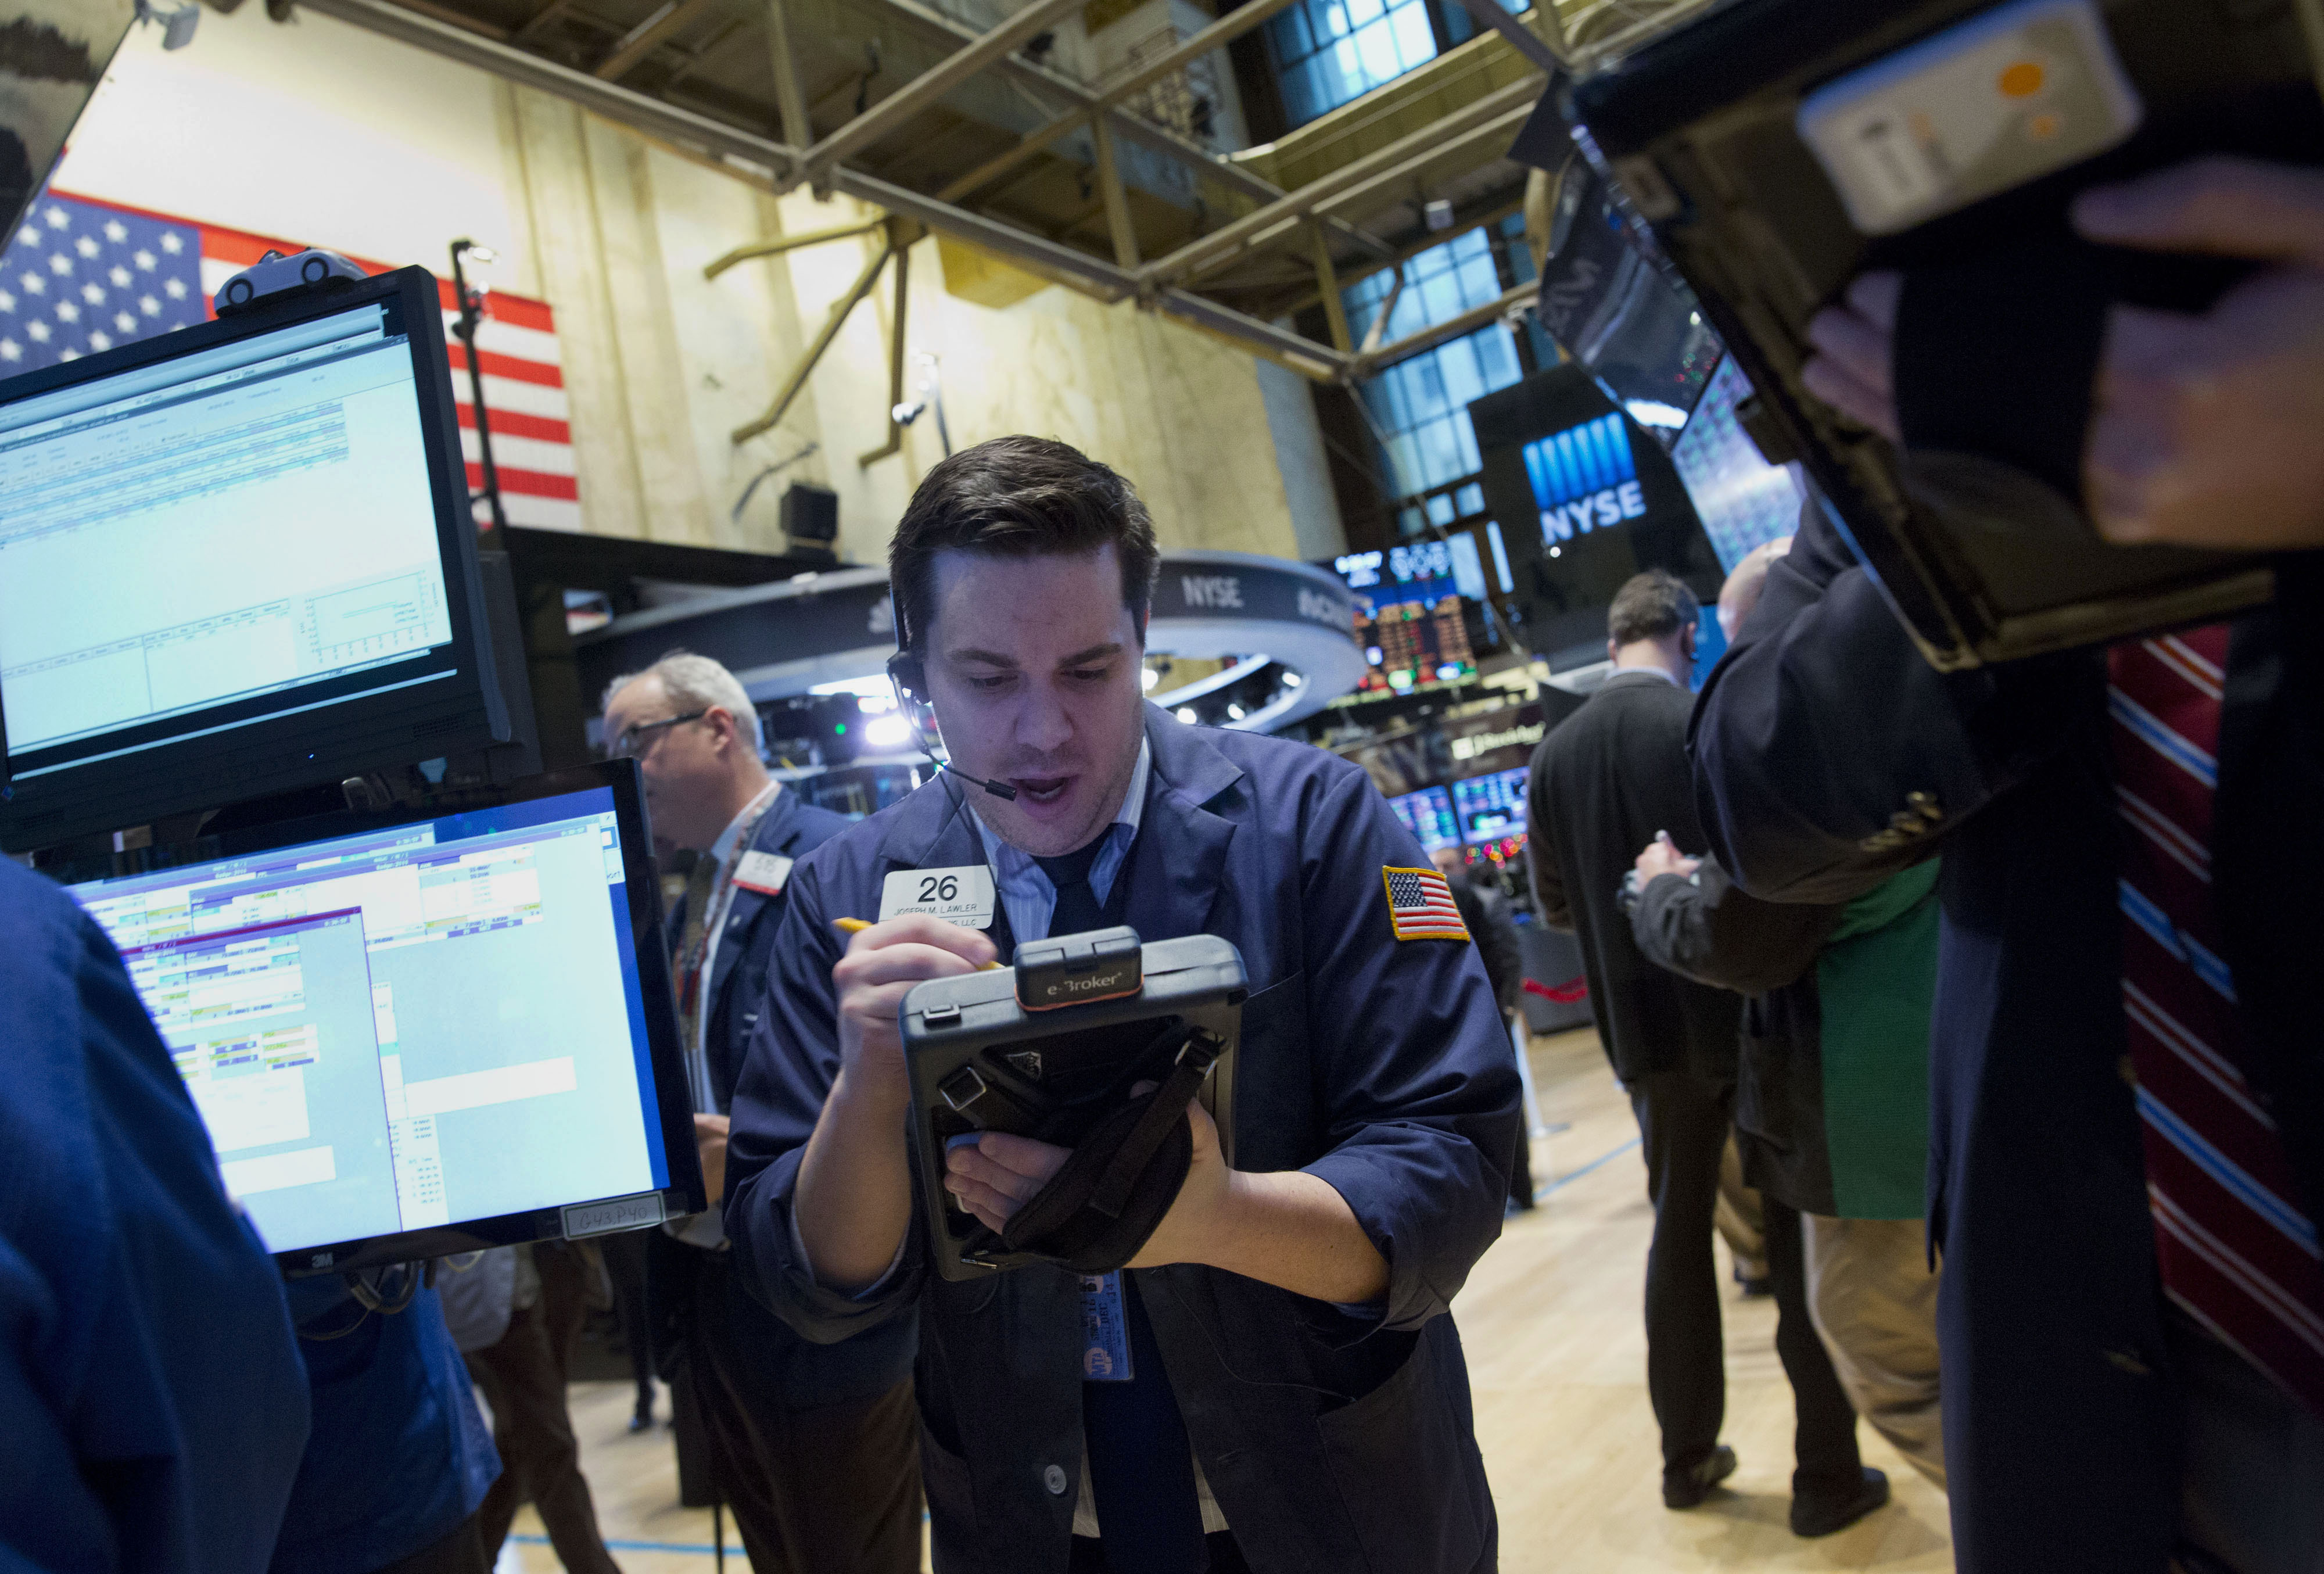 A trader works on the floor of the New York Stock Exchange (NYSE) in New York, U.S., on Friday, Jan. 2, 2015. U.S. stock-index futures climbed, indicating the Standard & Poor's 500 Index will rebound after posting its first December drop since 2007. Photographer: Jin Lee/Bloomberg